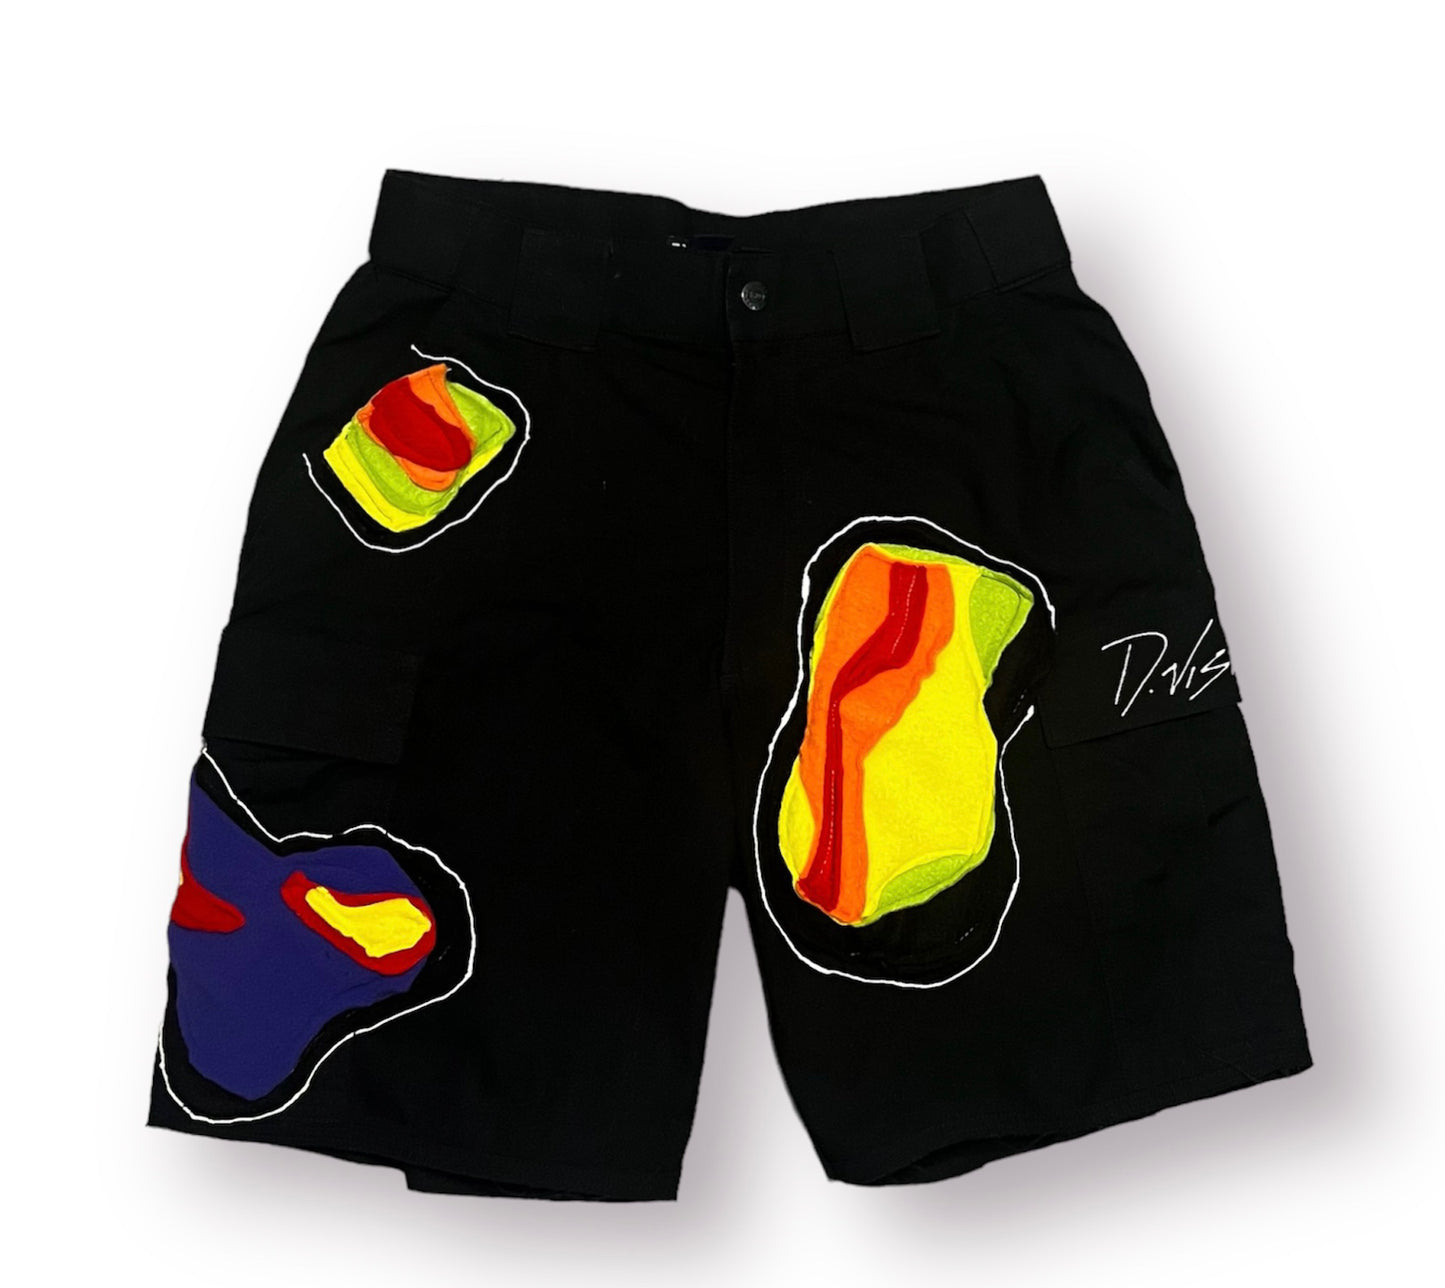 Thermal Cargo Shorts